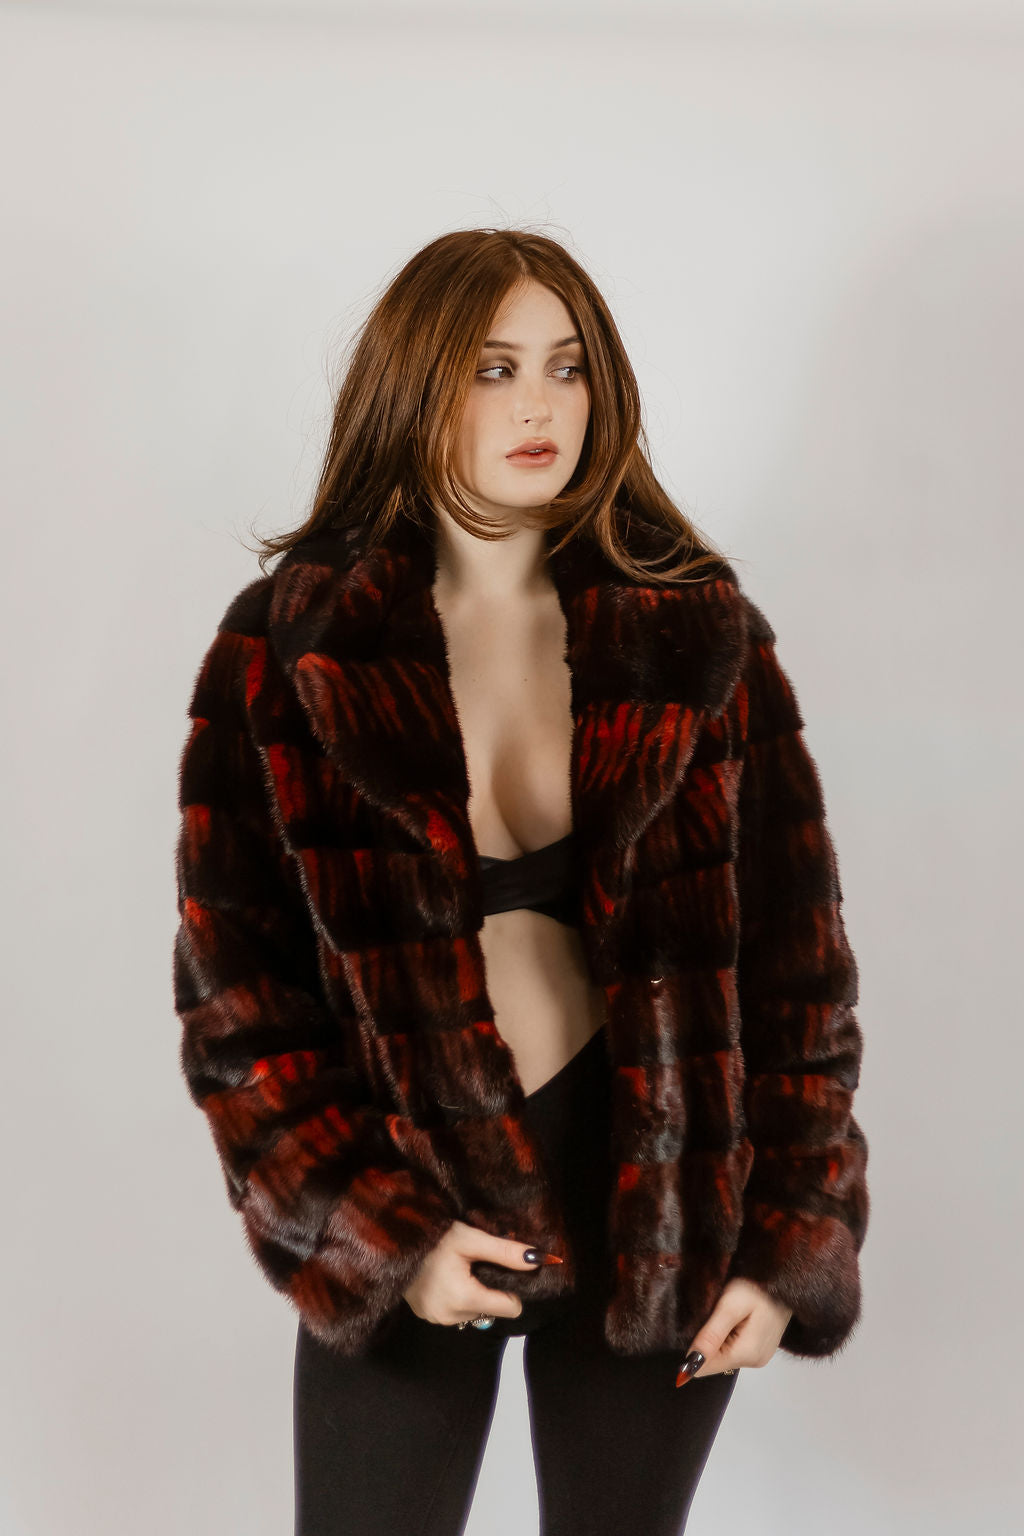 Dyed Red and Black Mink Jacket